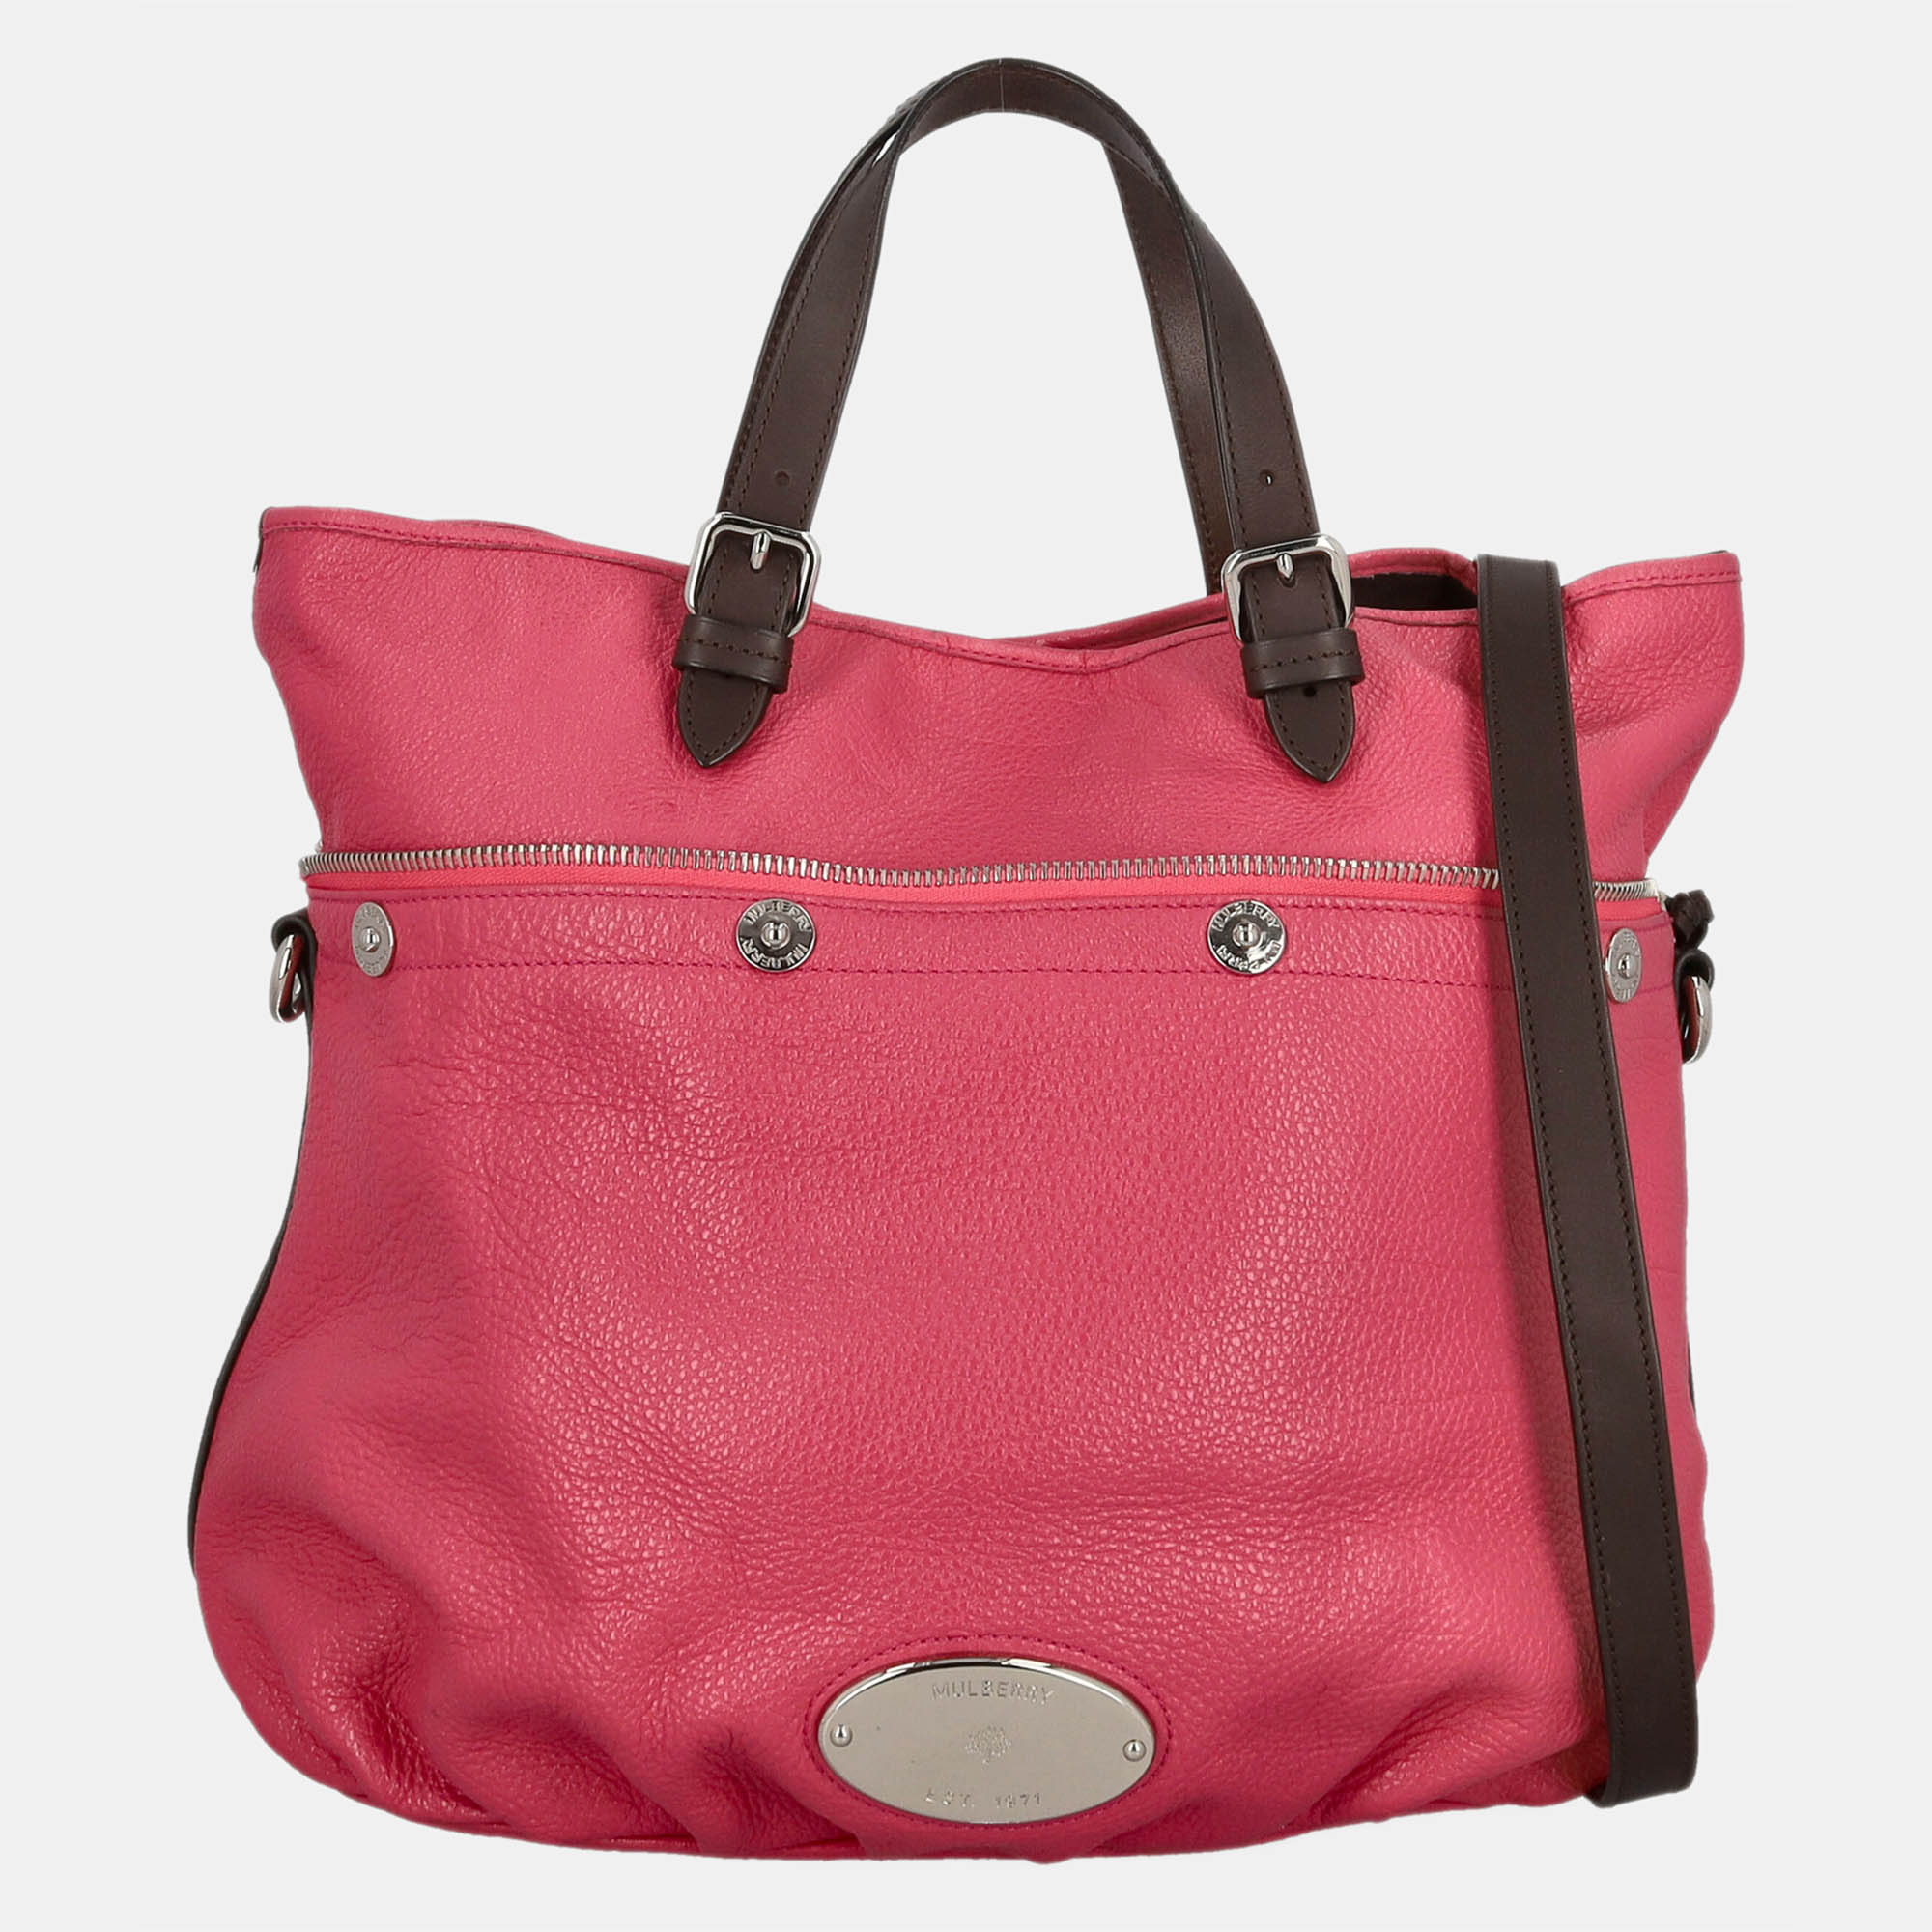 Mulberry  Women's Leather Tote Bag - Pink - One Size